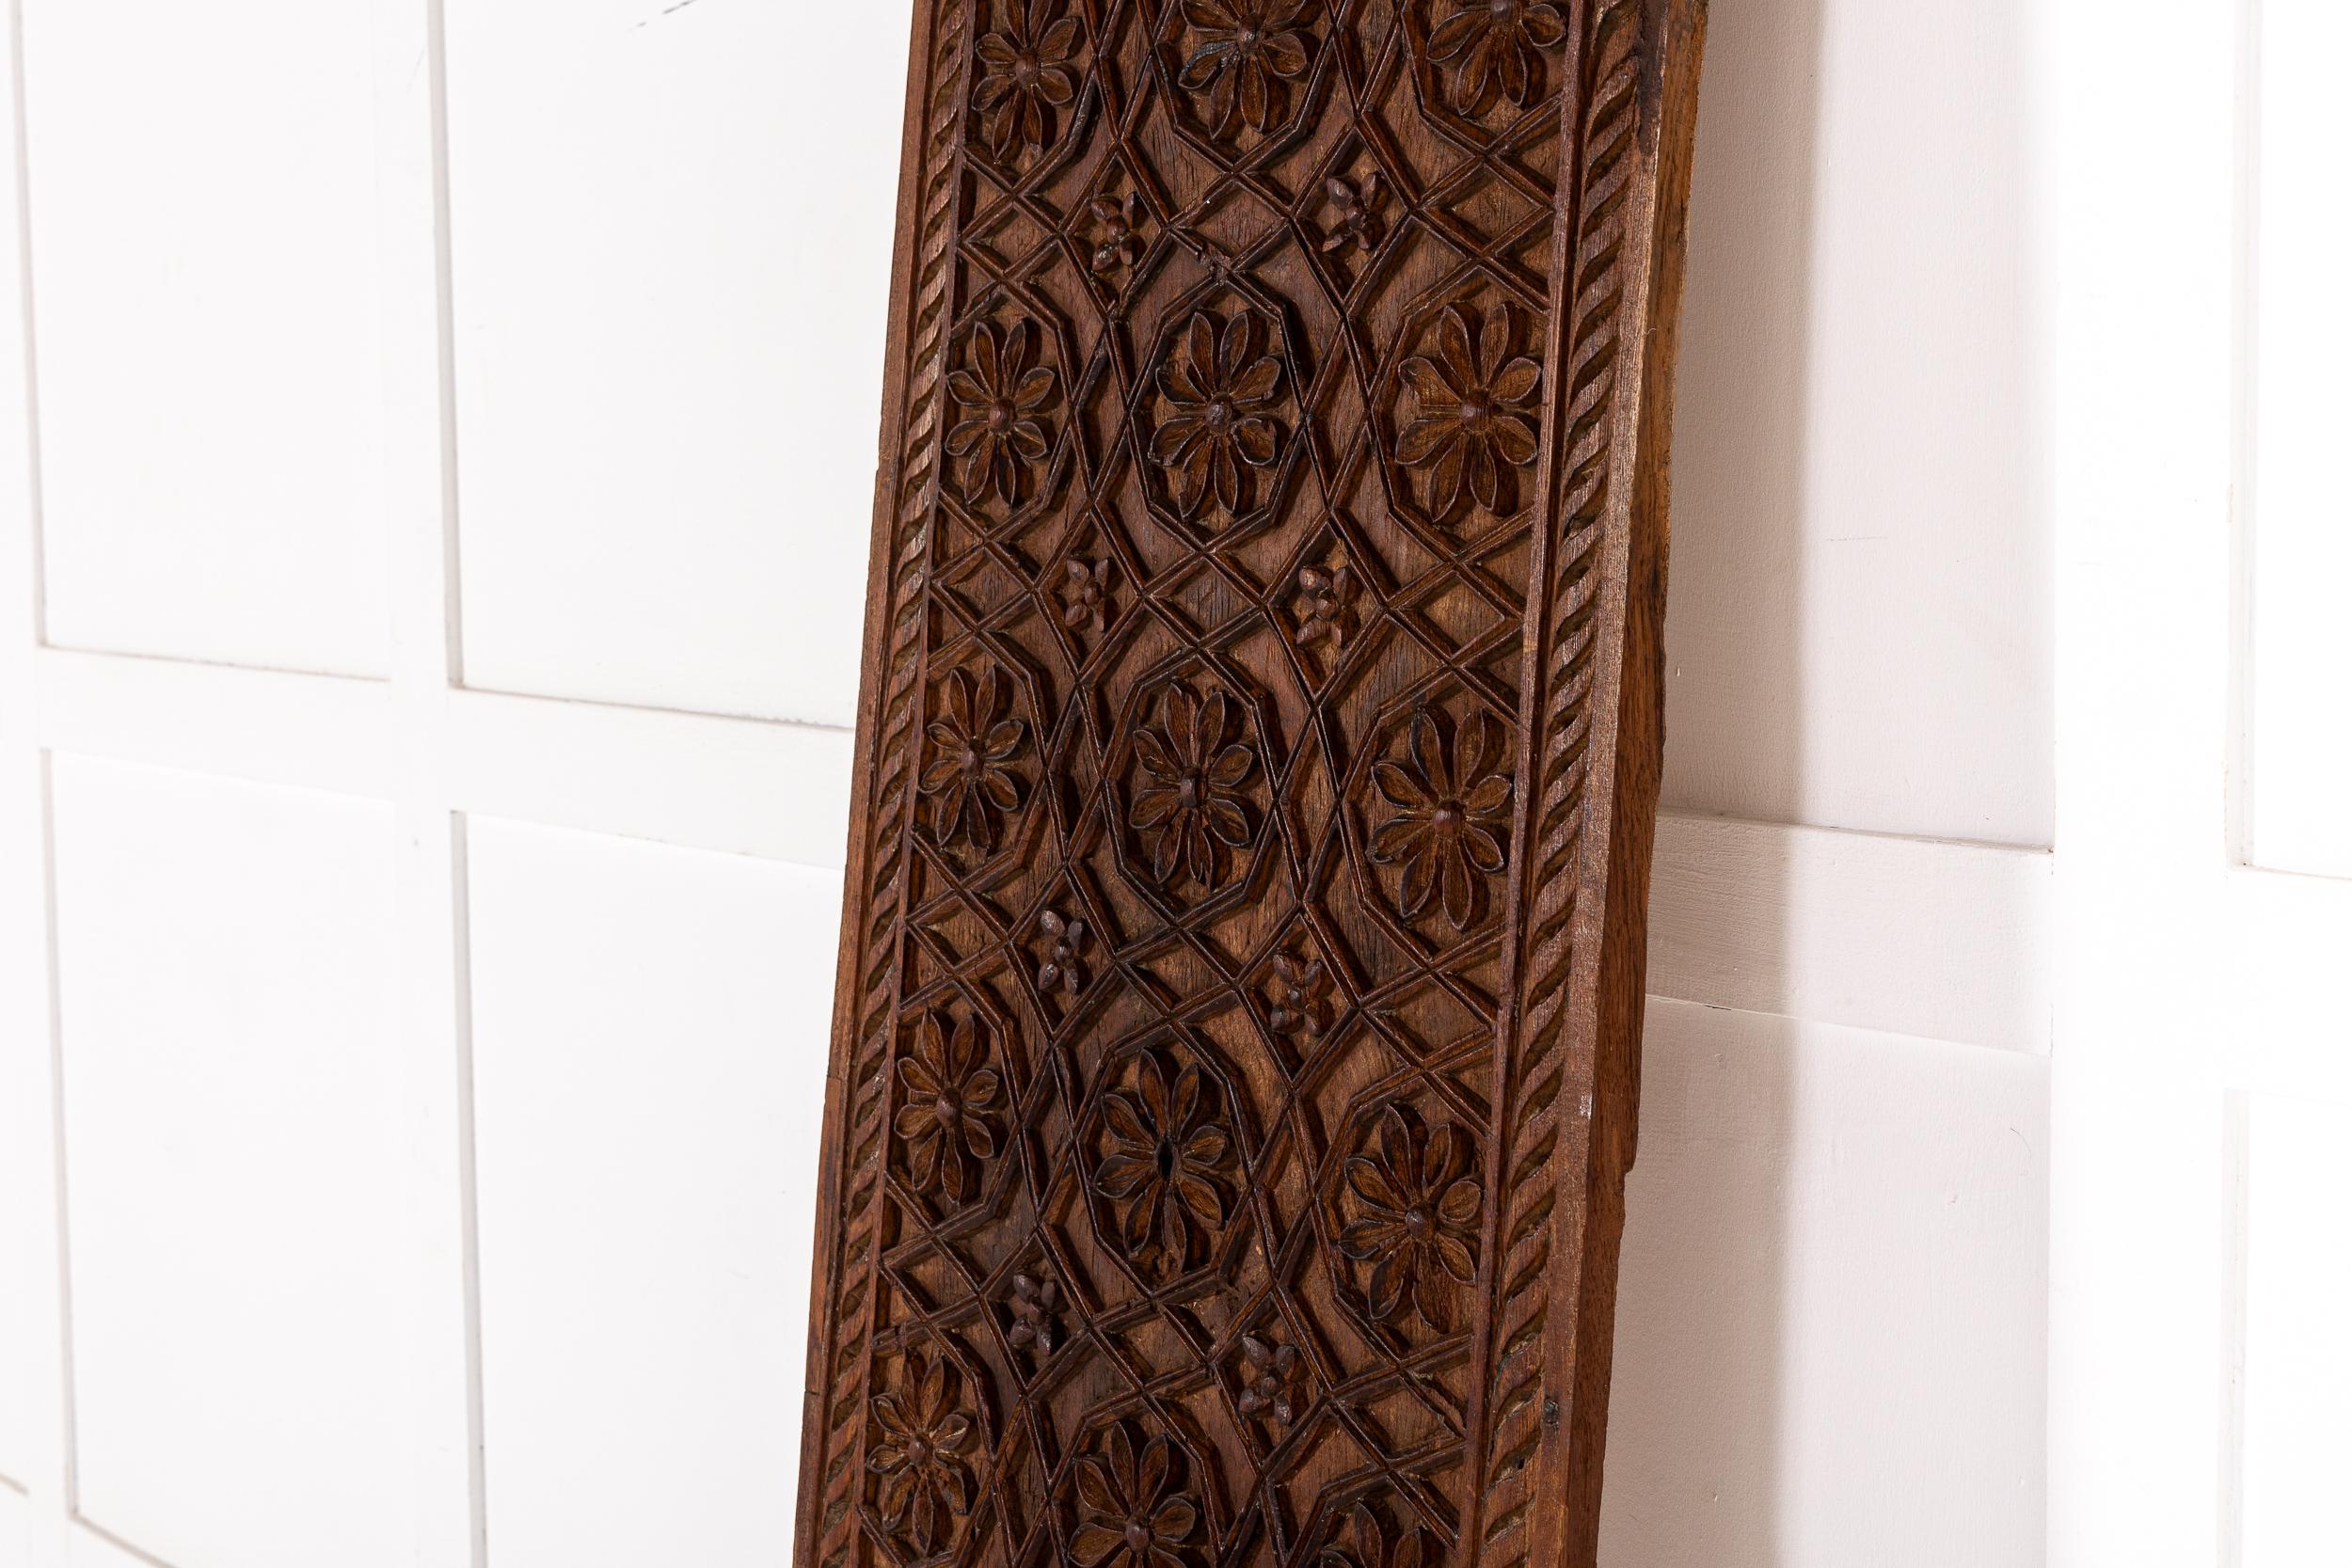 Large 19th Century Syrian Carved Hardwood Panel For Sale 1